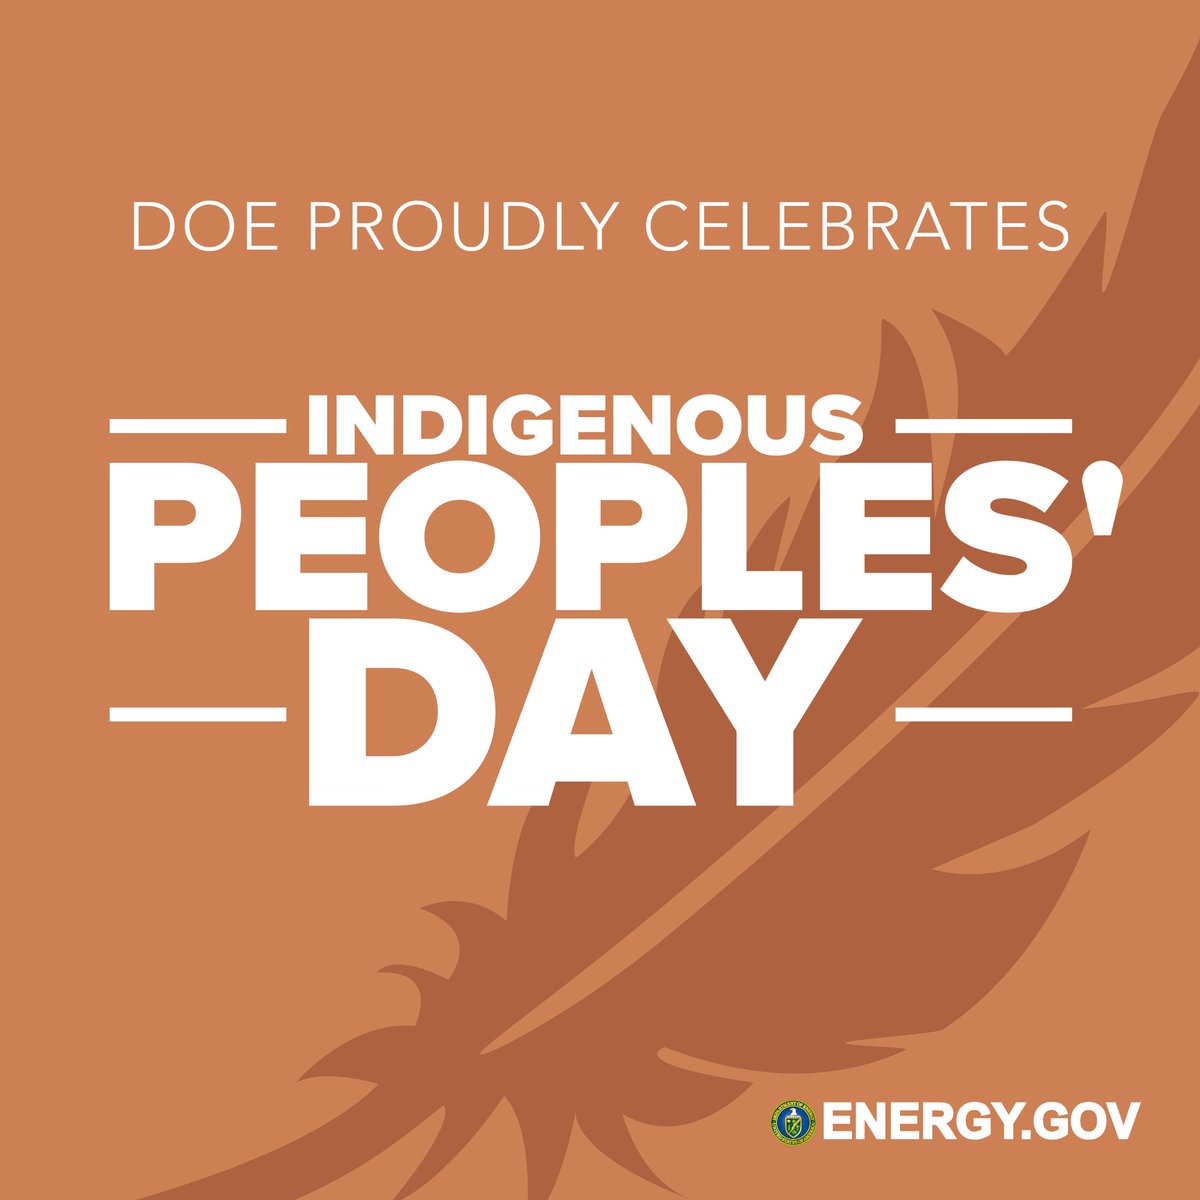 This Indigenous People's Day, we recognize the contributions Tribal communities have made throughout history. We honor their resilience, and their strength. Together we will chart an inclusive and just path forward to a prosperous clean energy future for all.